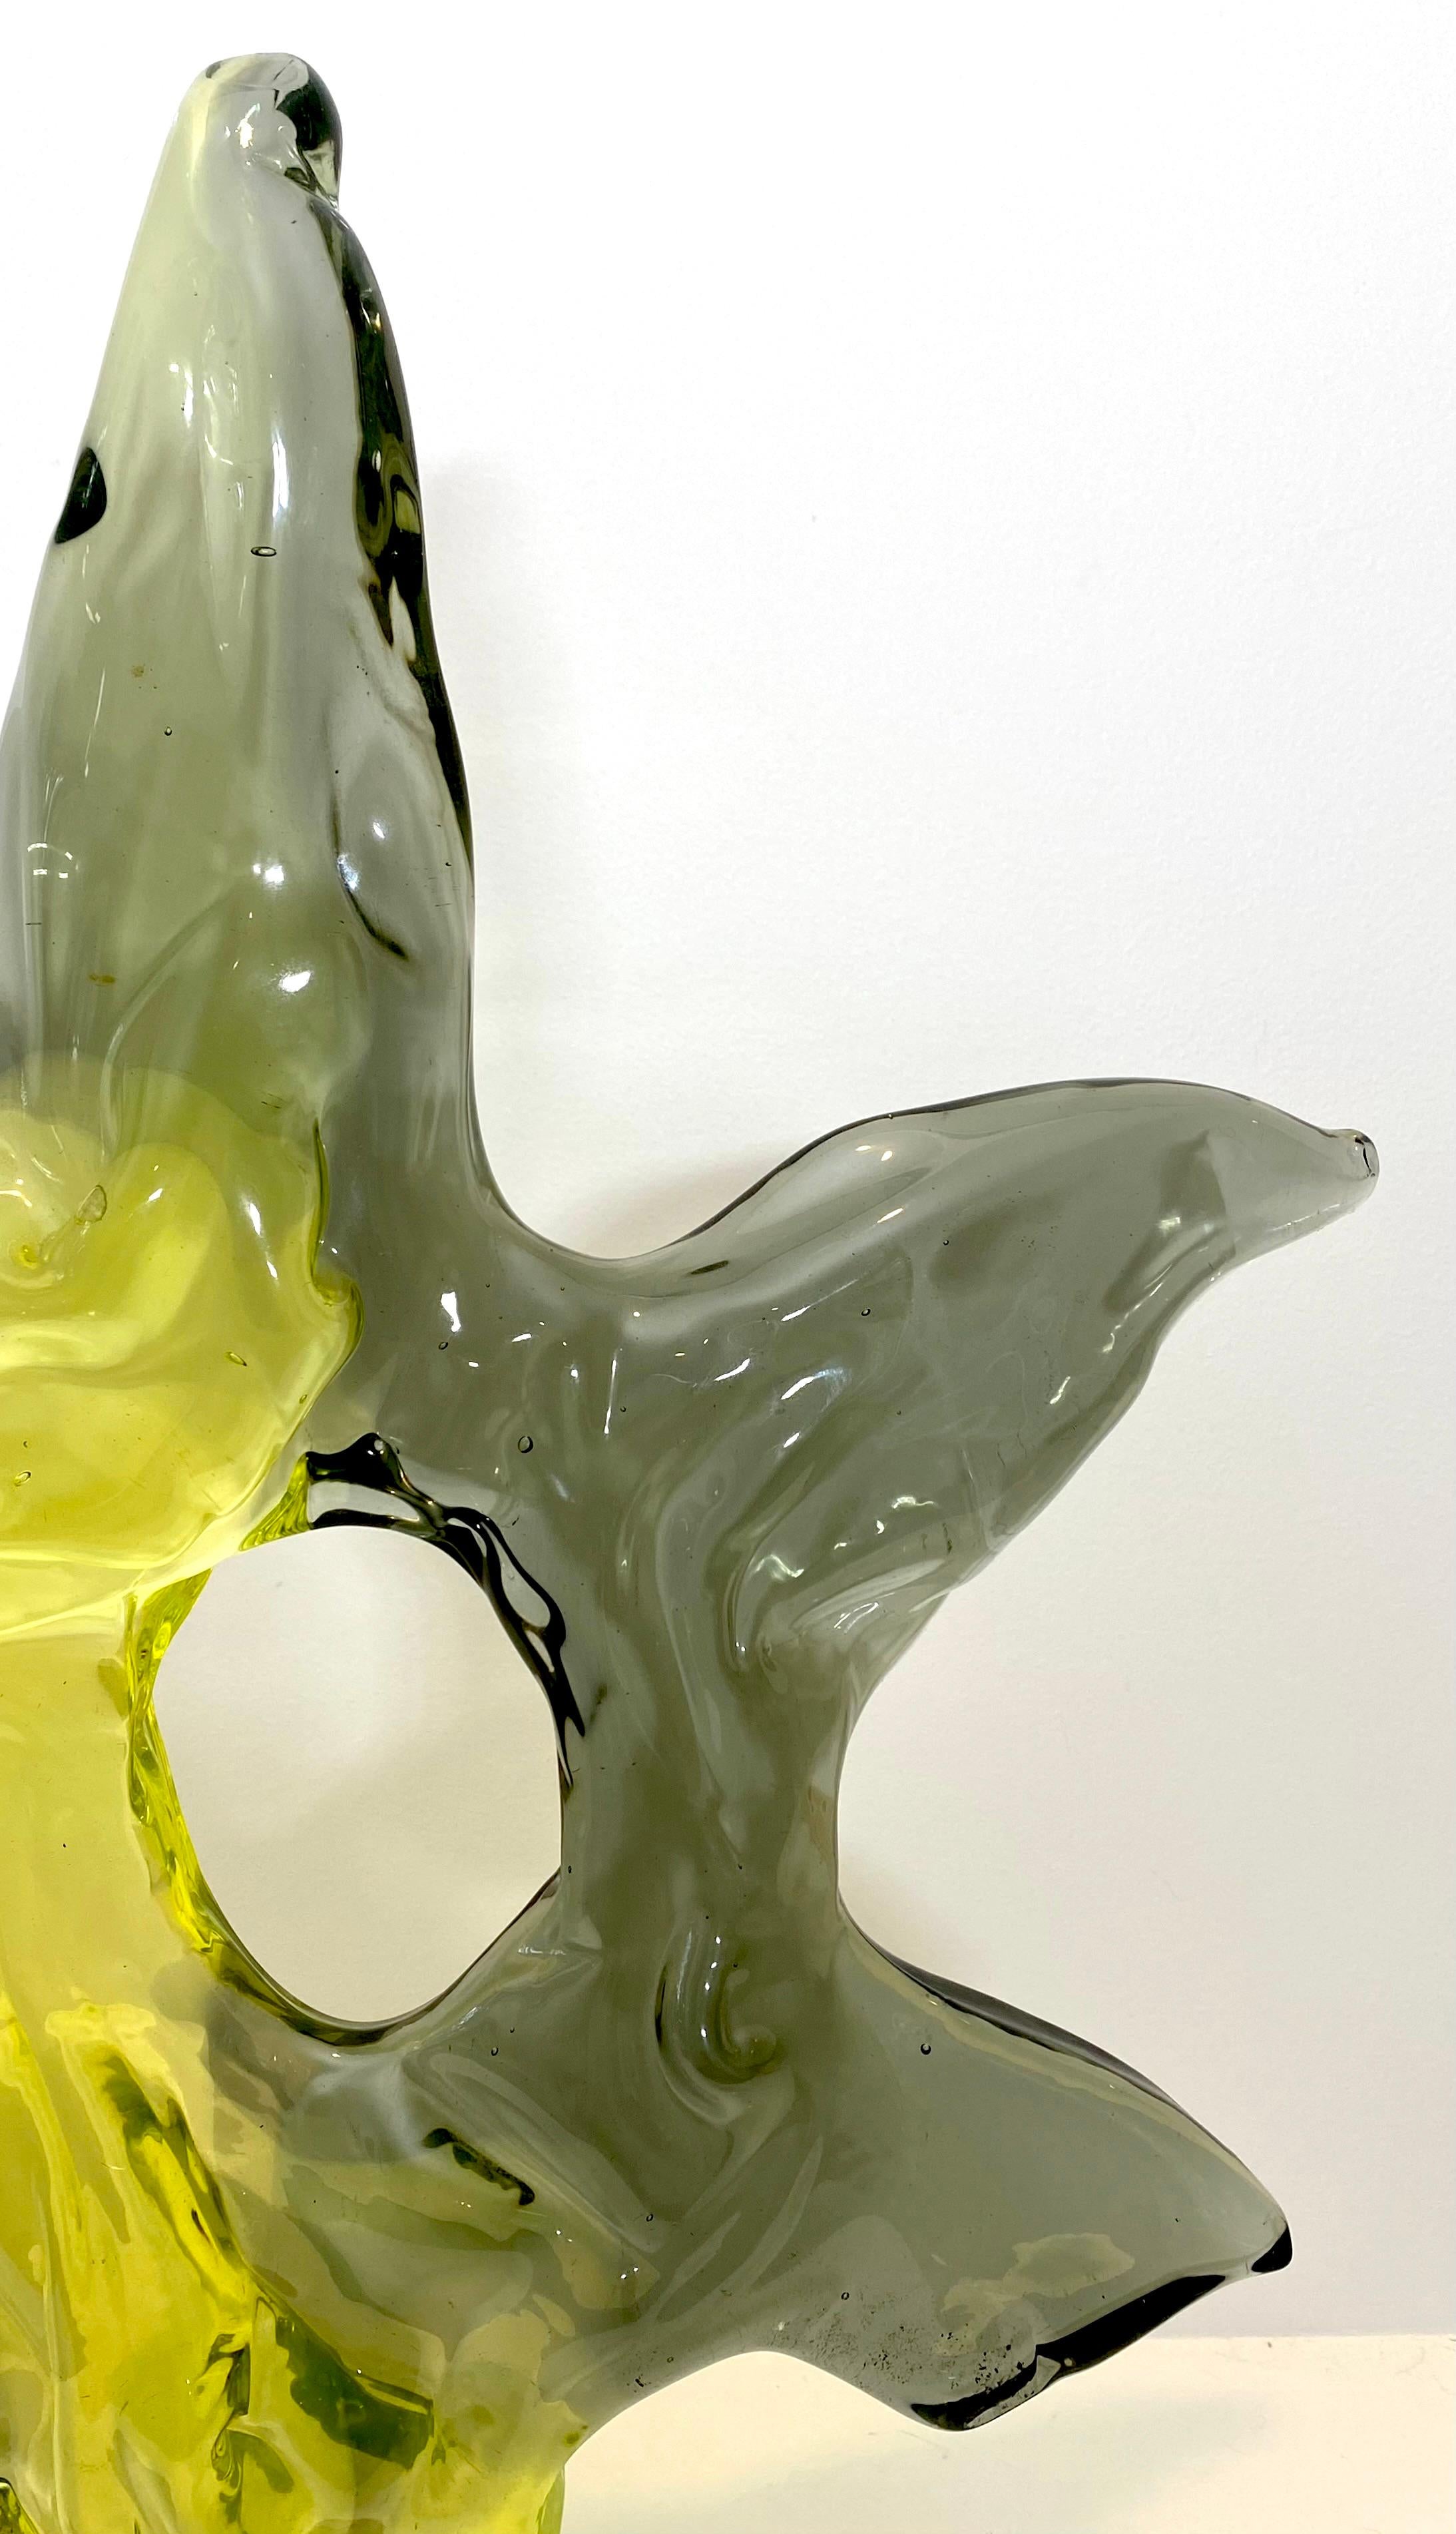 Stunning and amazing is this massive Livio Seguso two toned glass sculpture by Luciano Gaspari. Gaspari and Seguso often collaborated on Murano sculptures and this is a true masterpiece with twice the talent!
While the colors of this sculpture